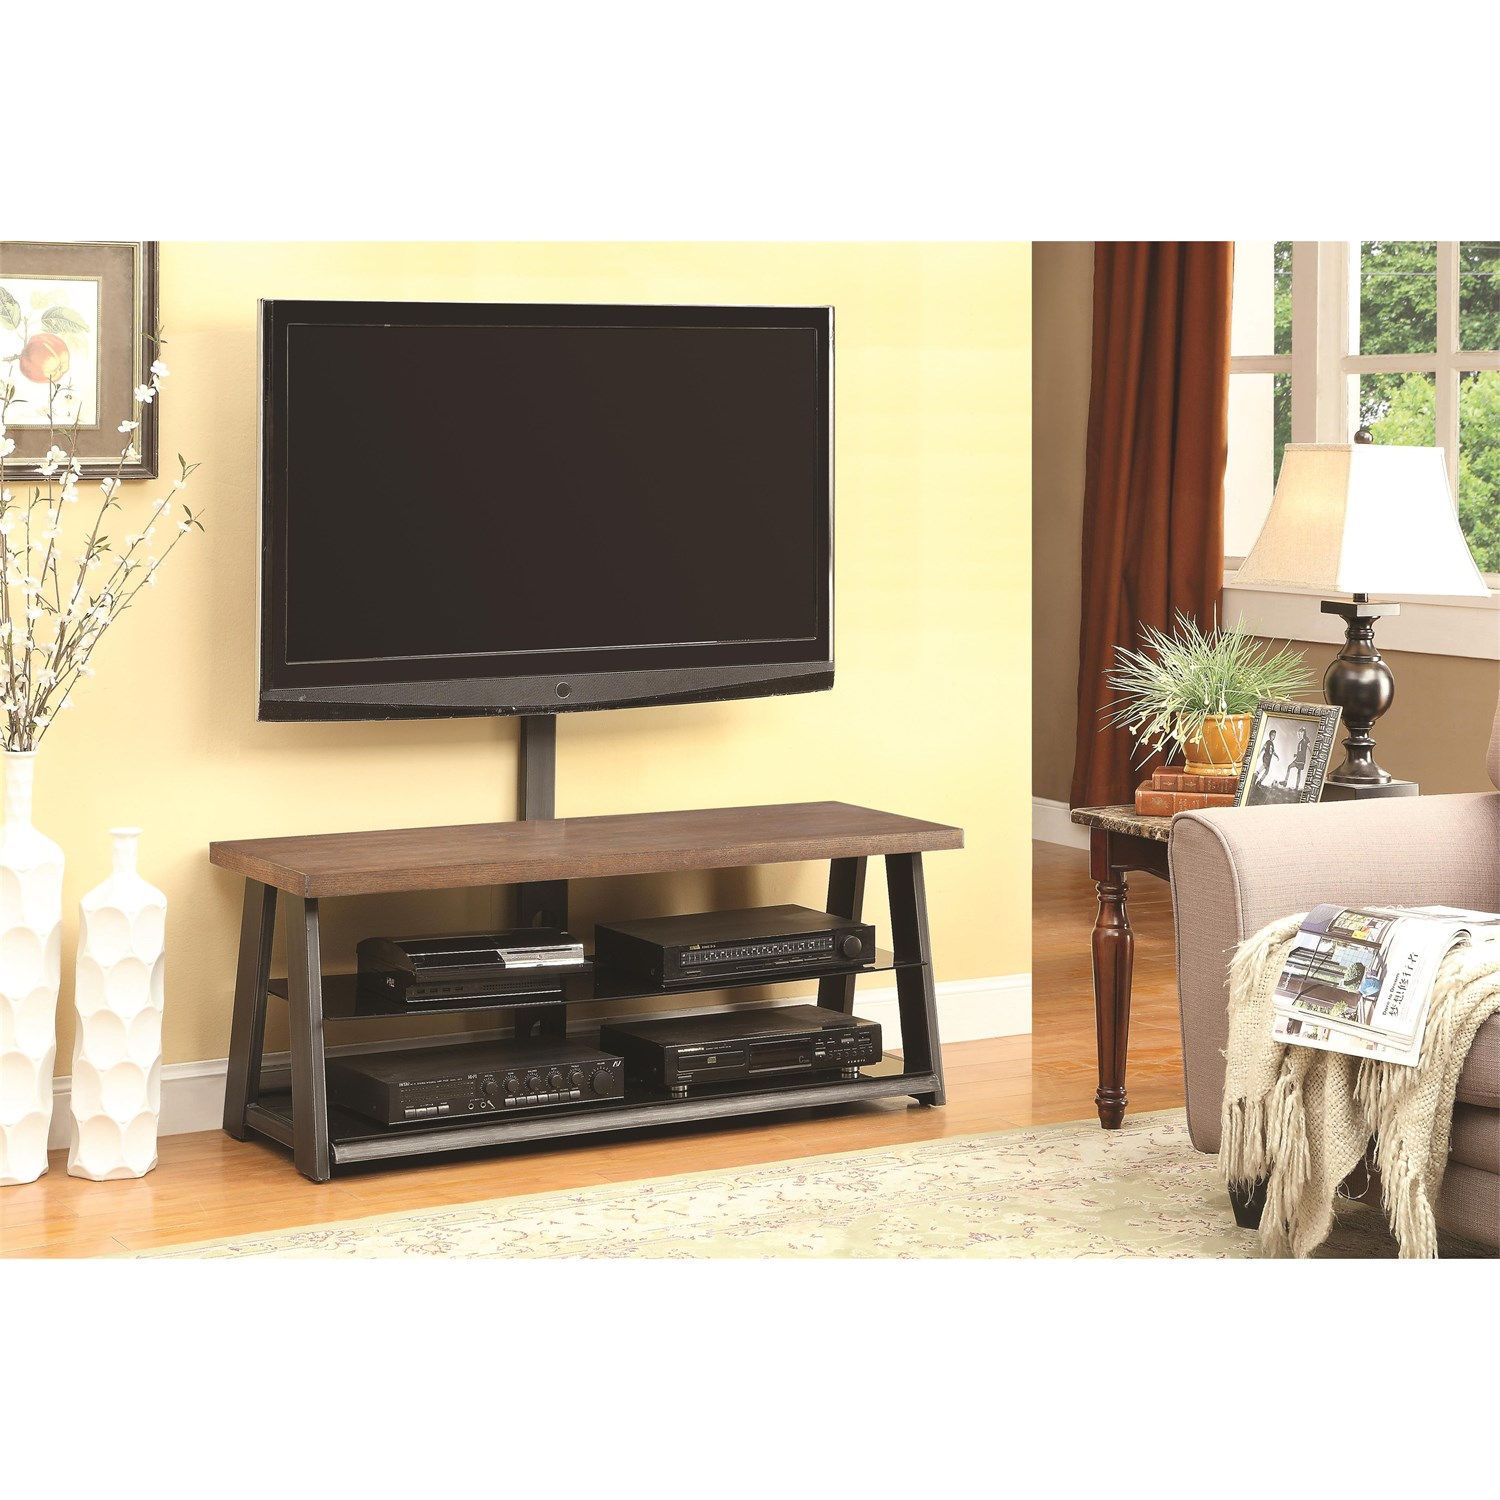 Coaster Furniture 700217 TV Stand in Brown Wood | Coasters, Tv ...